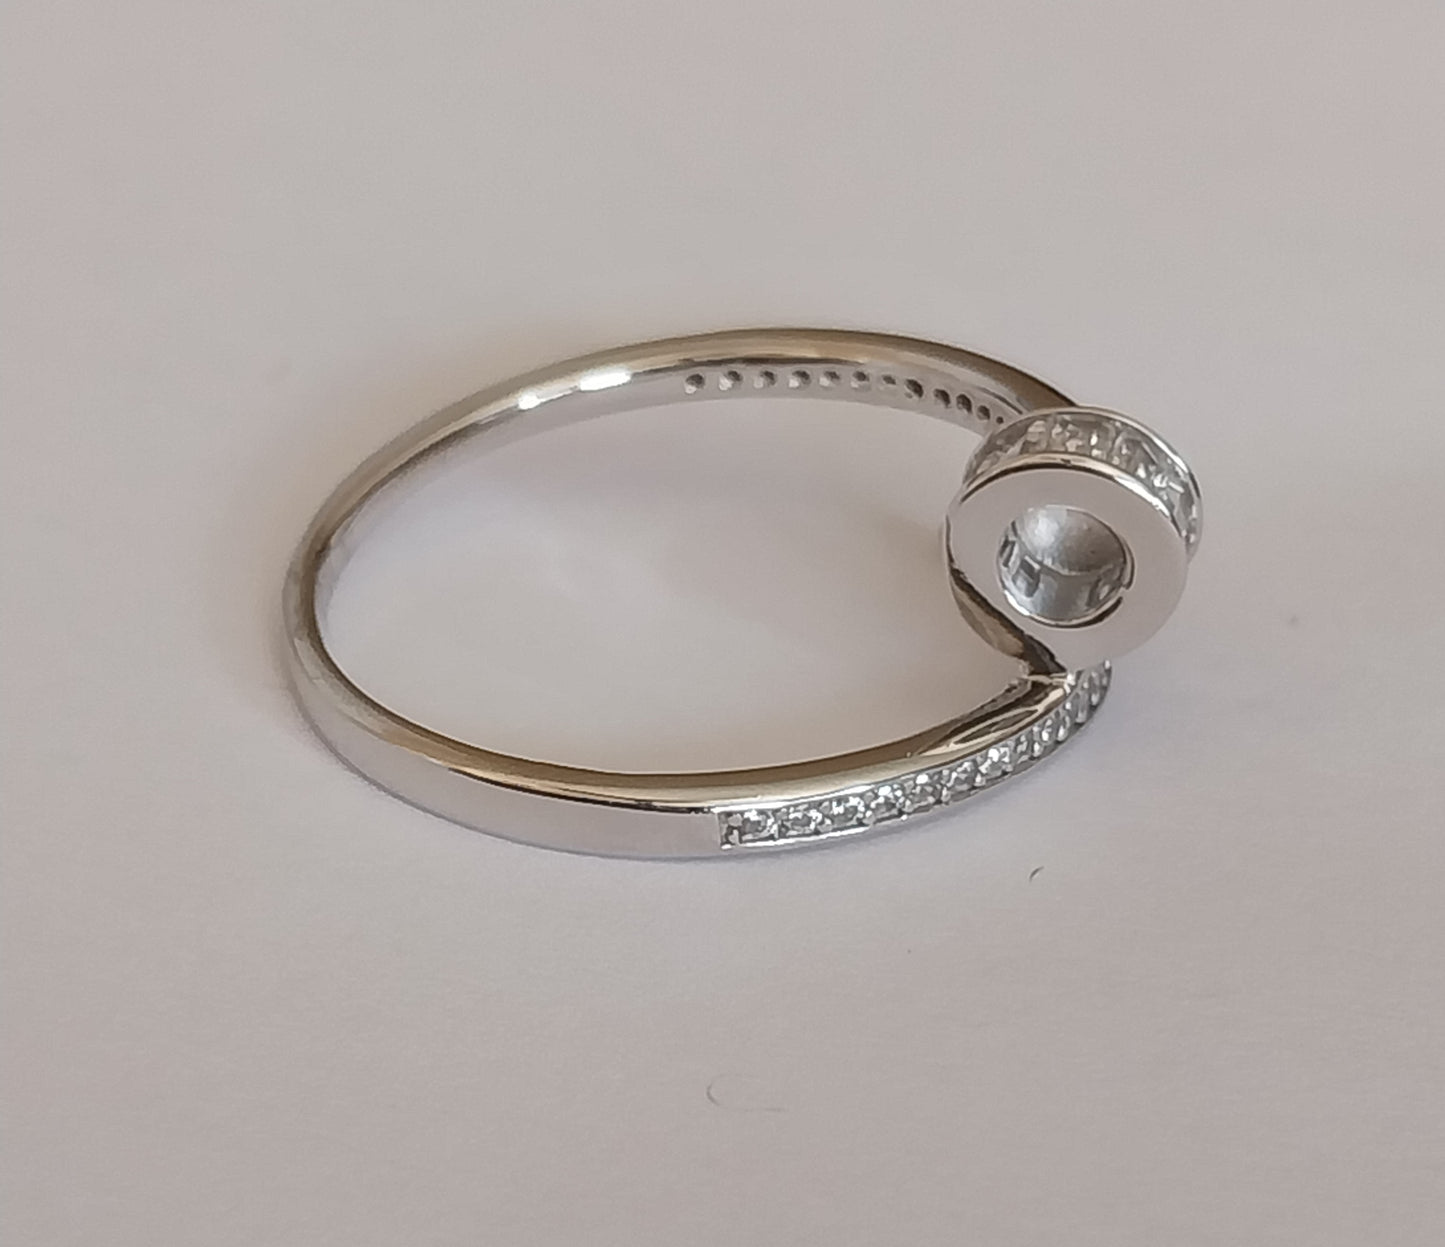 Nail Shape Silver Ring with Cubic Zirconia Stones